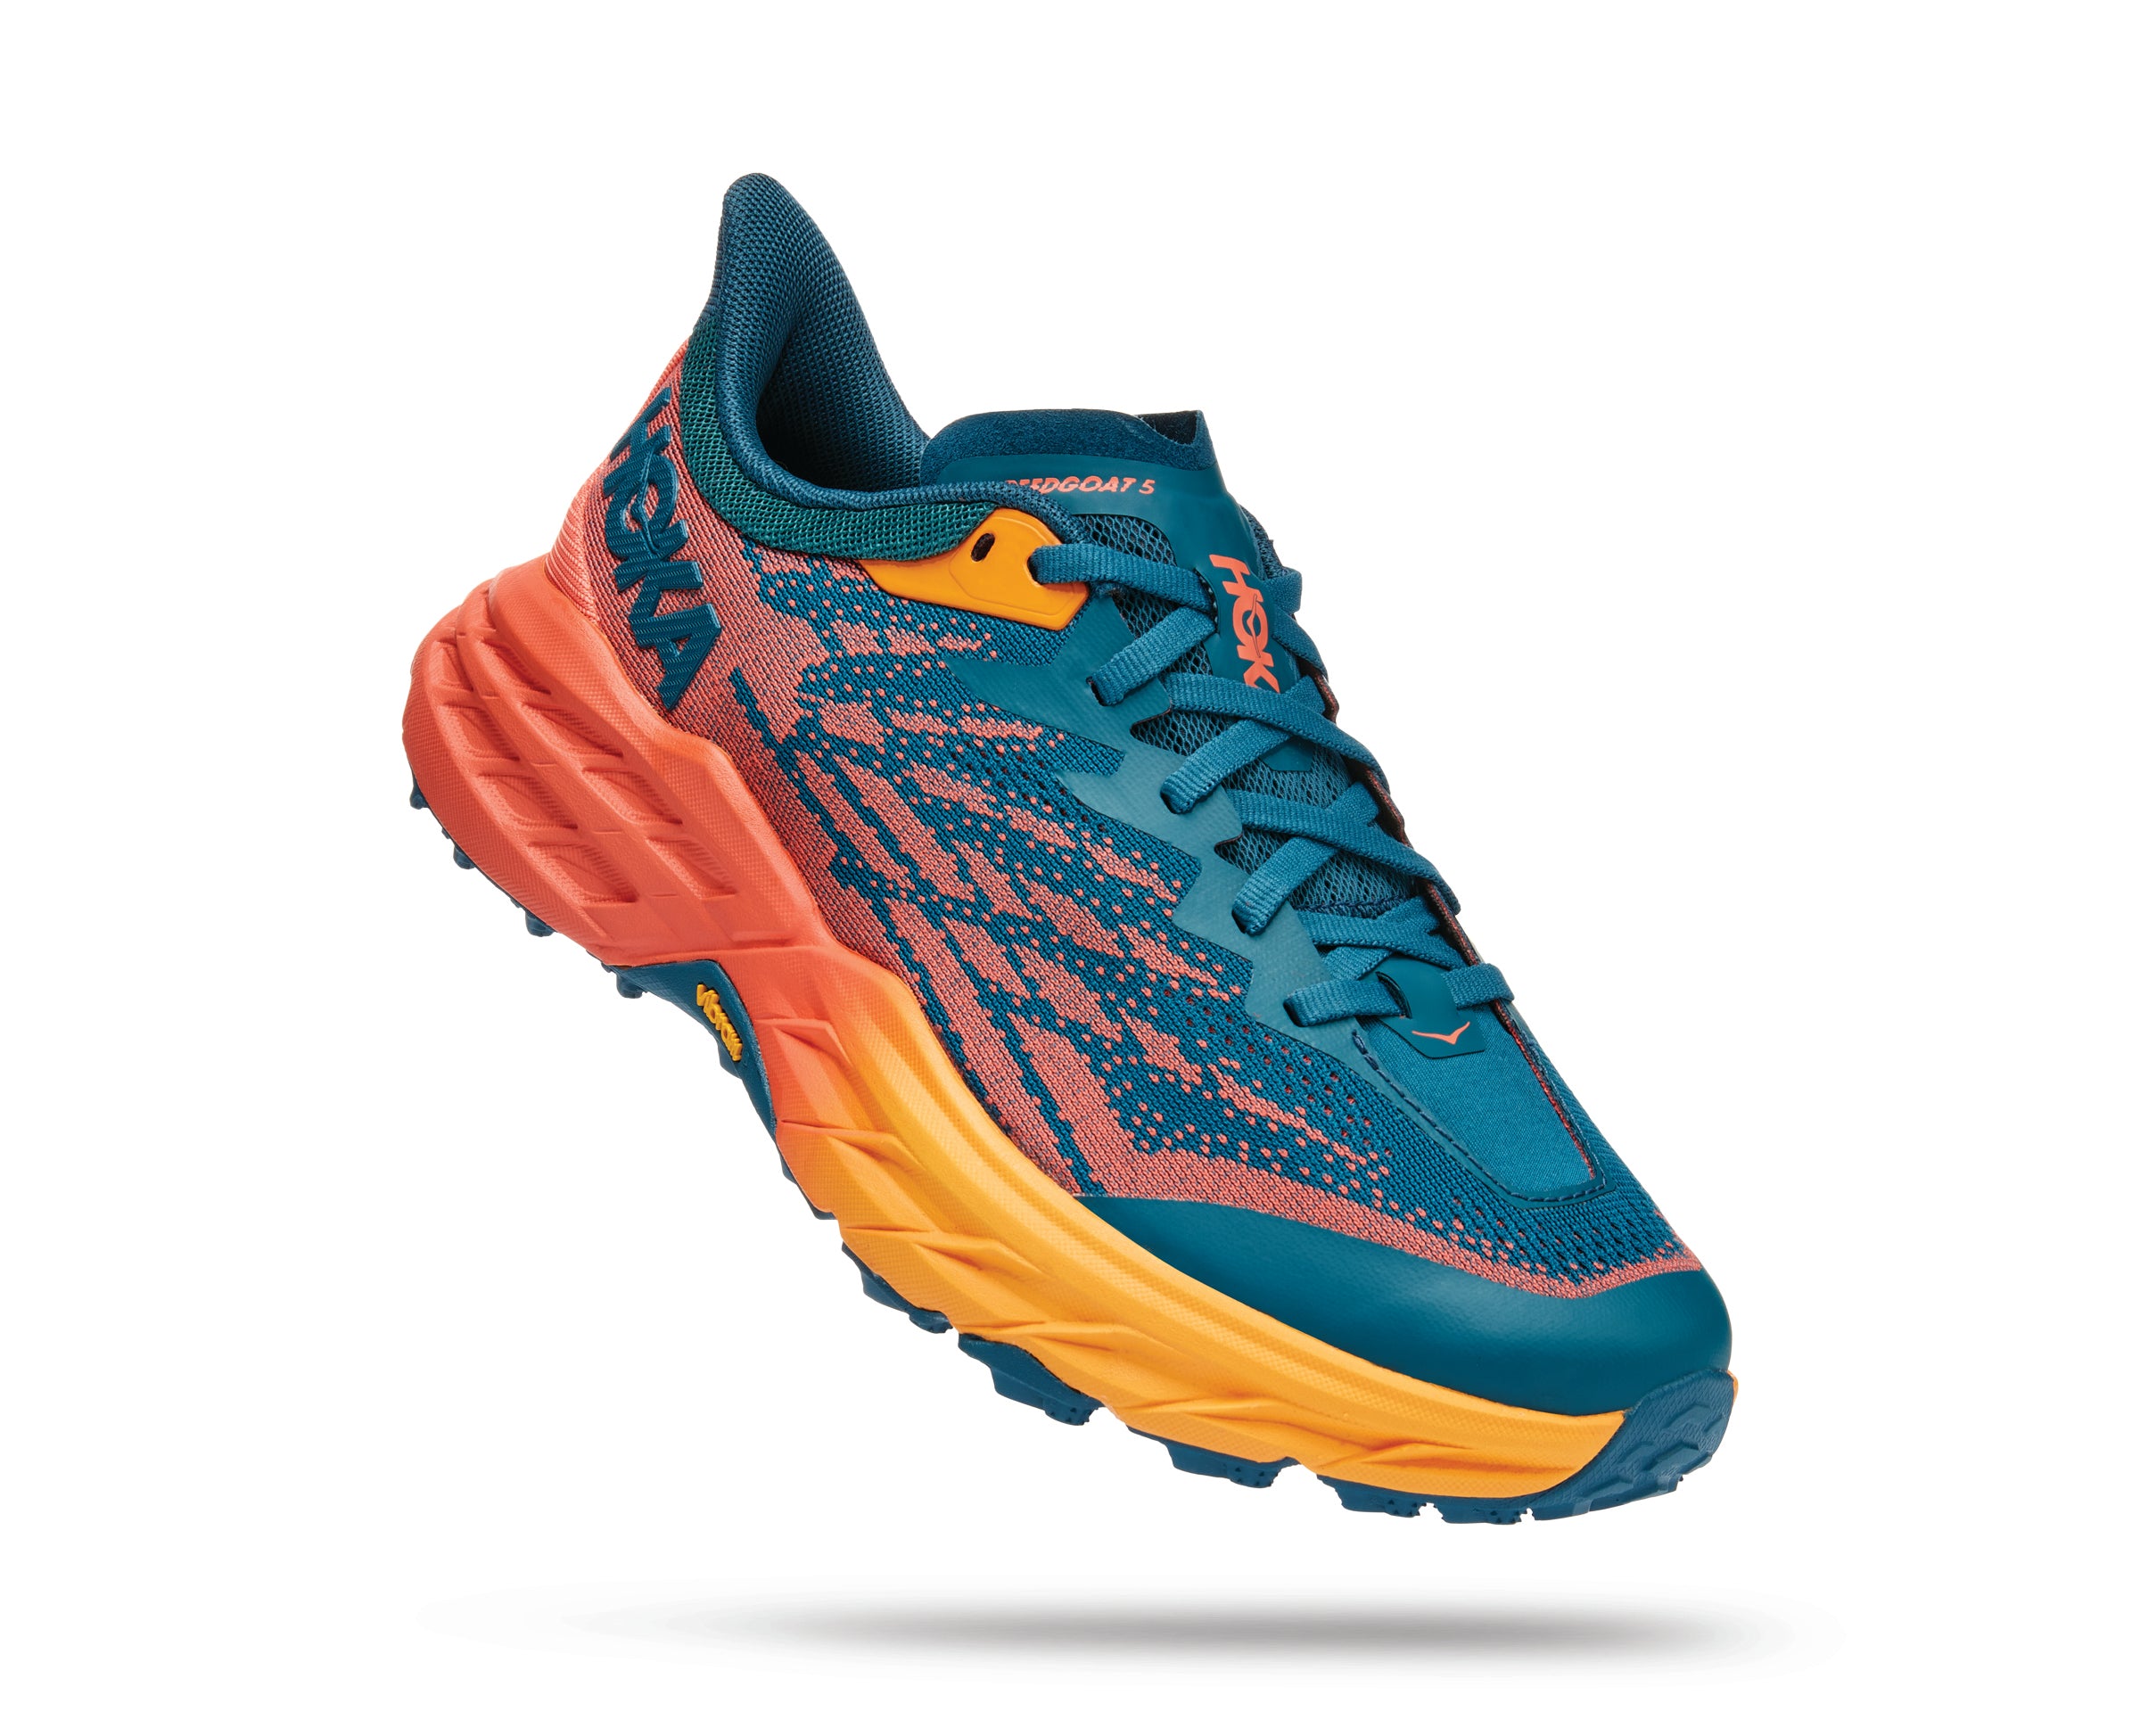 Lateral angle view of the Women's Speedgoat 5 by HOKA in the color Blue Coral / Camellia